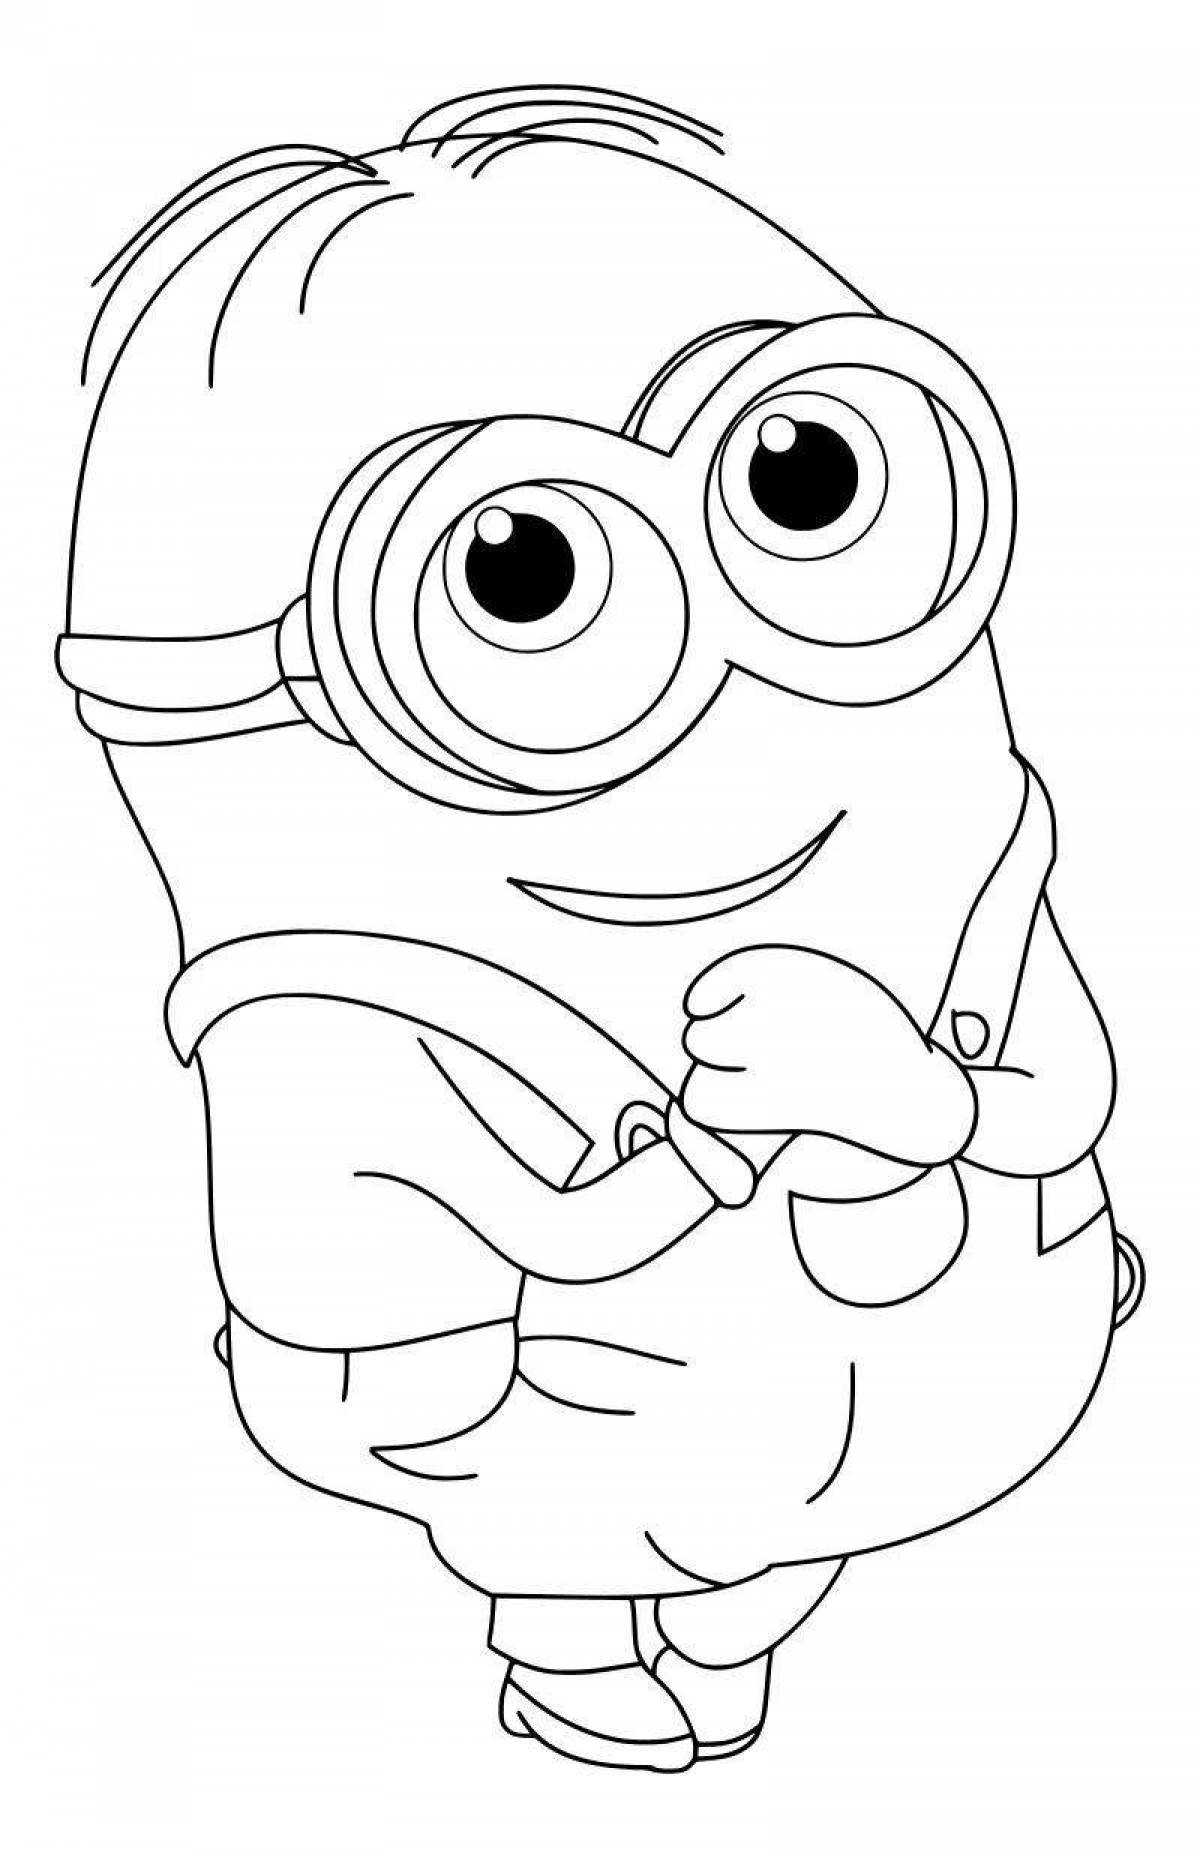 Gorgeous kevin minion coloring page